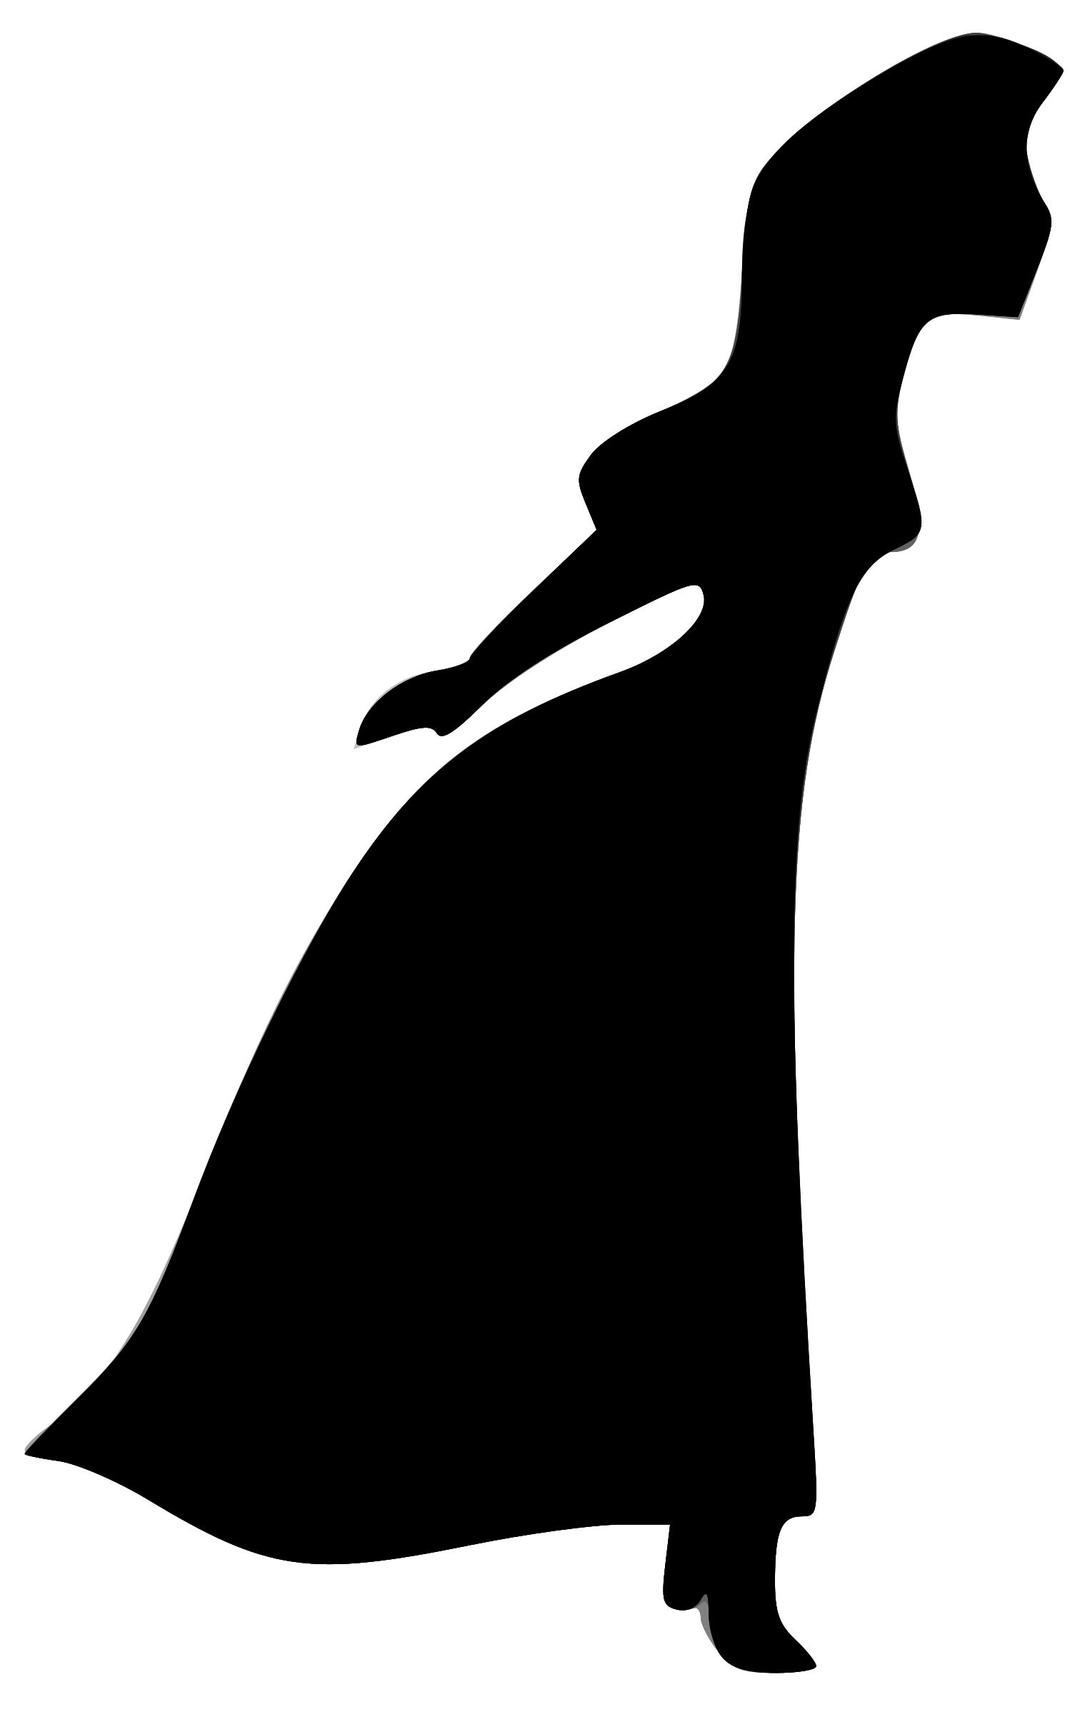 Woman's silhouette png transparent